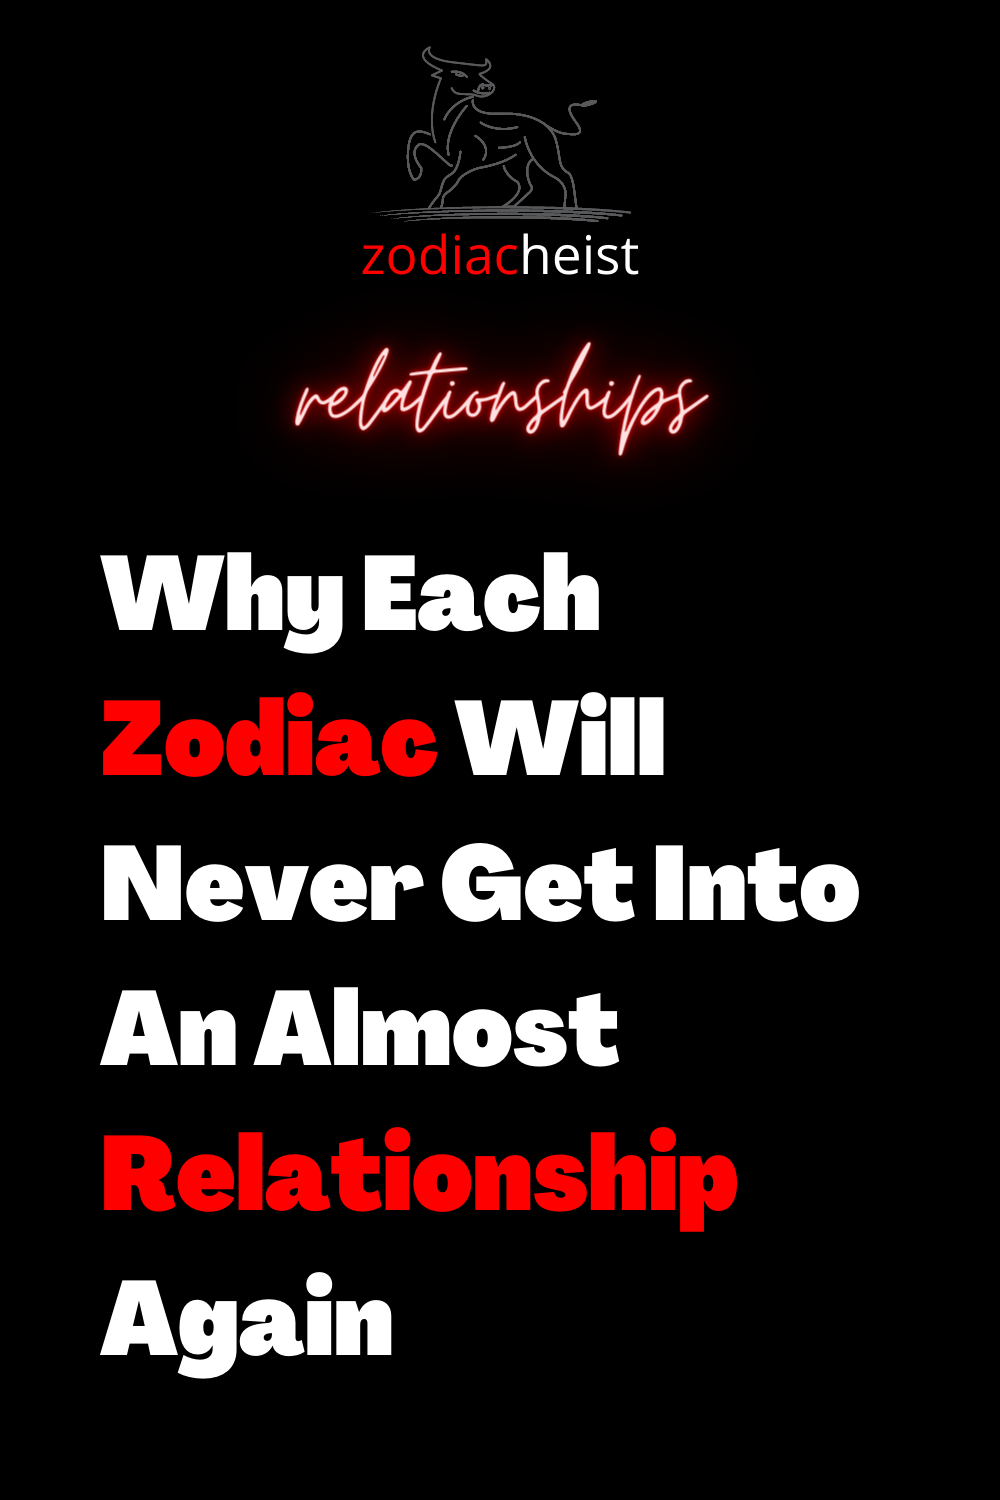 Why Each Zodiac Will Never Get Into An Almost Relationship Again